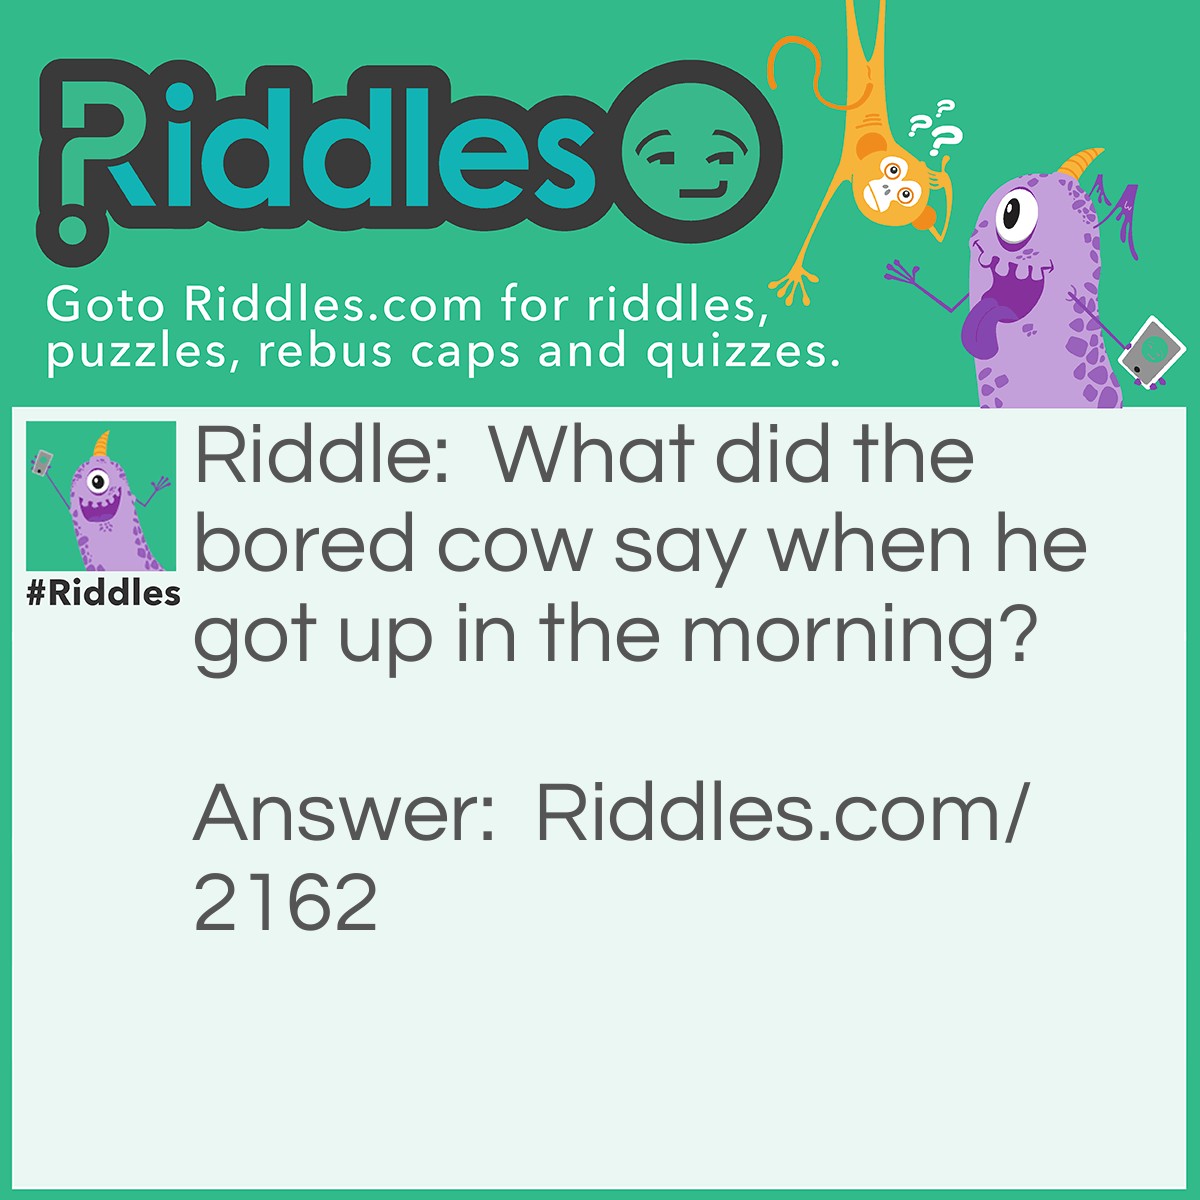 Riddle: What did the bored cow say when he got up in the morning? Answer: "Just an udder day."